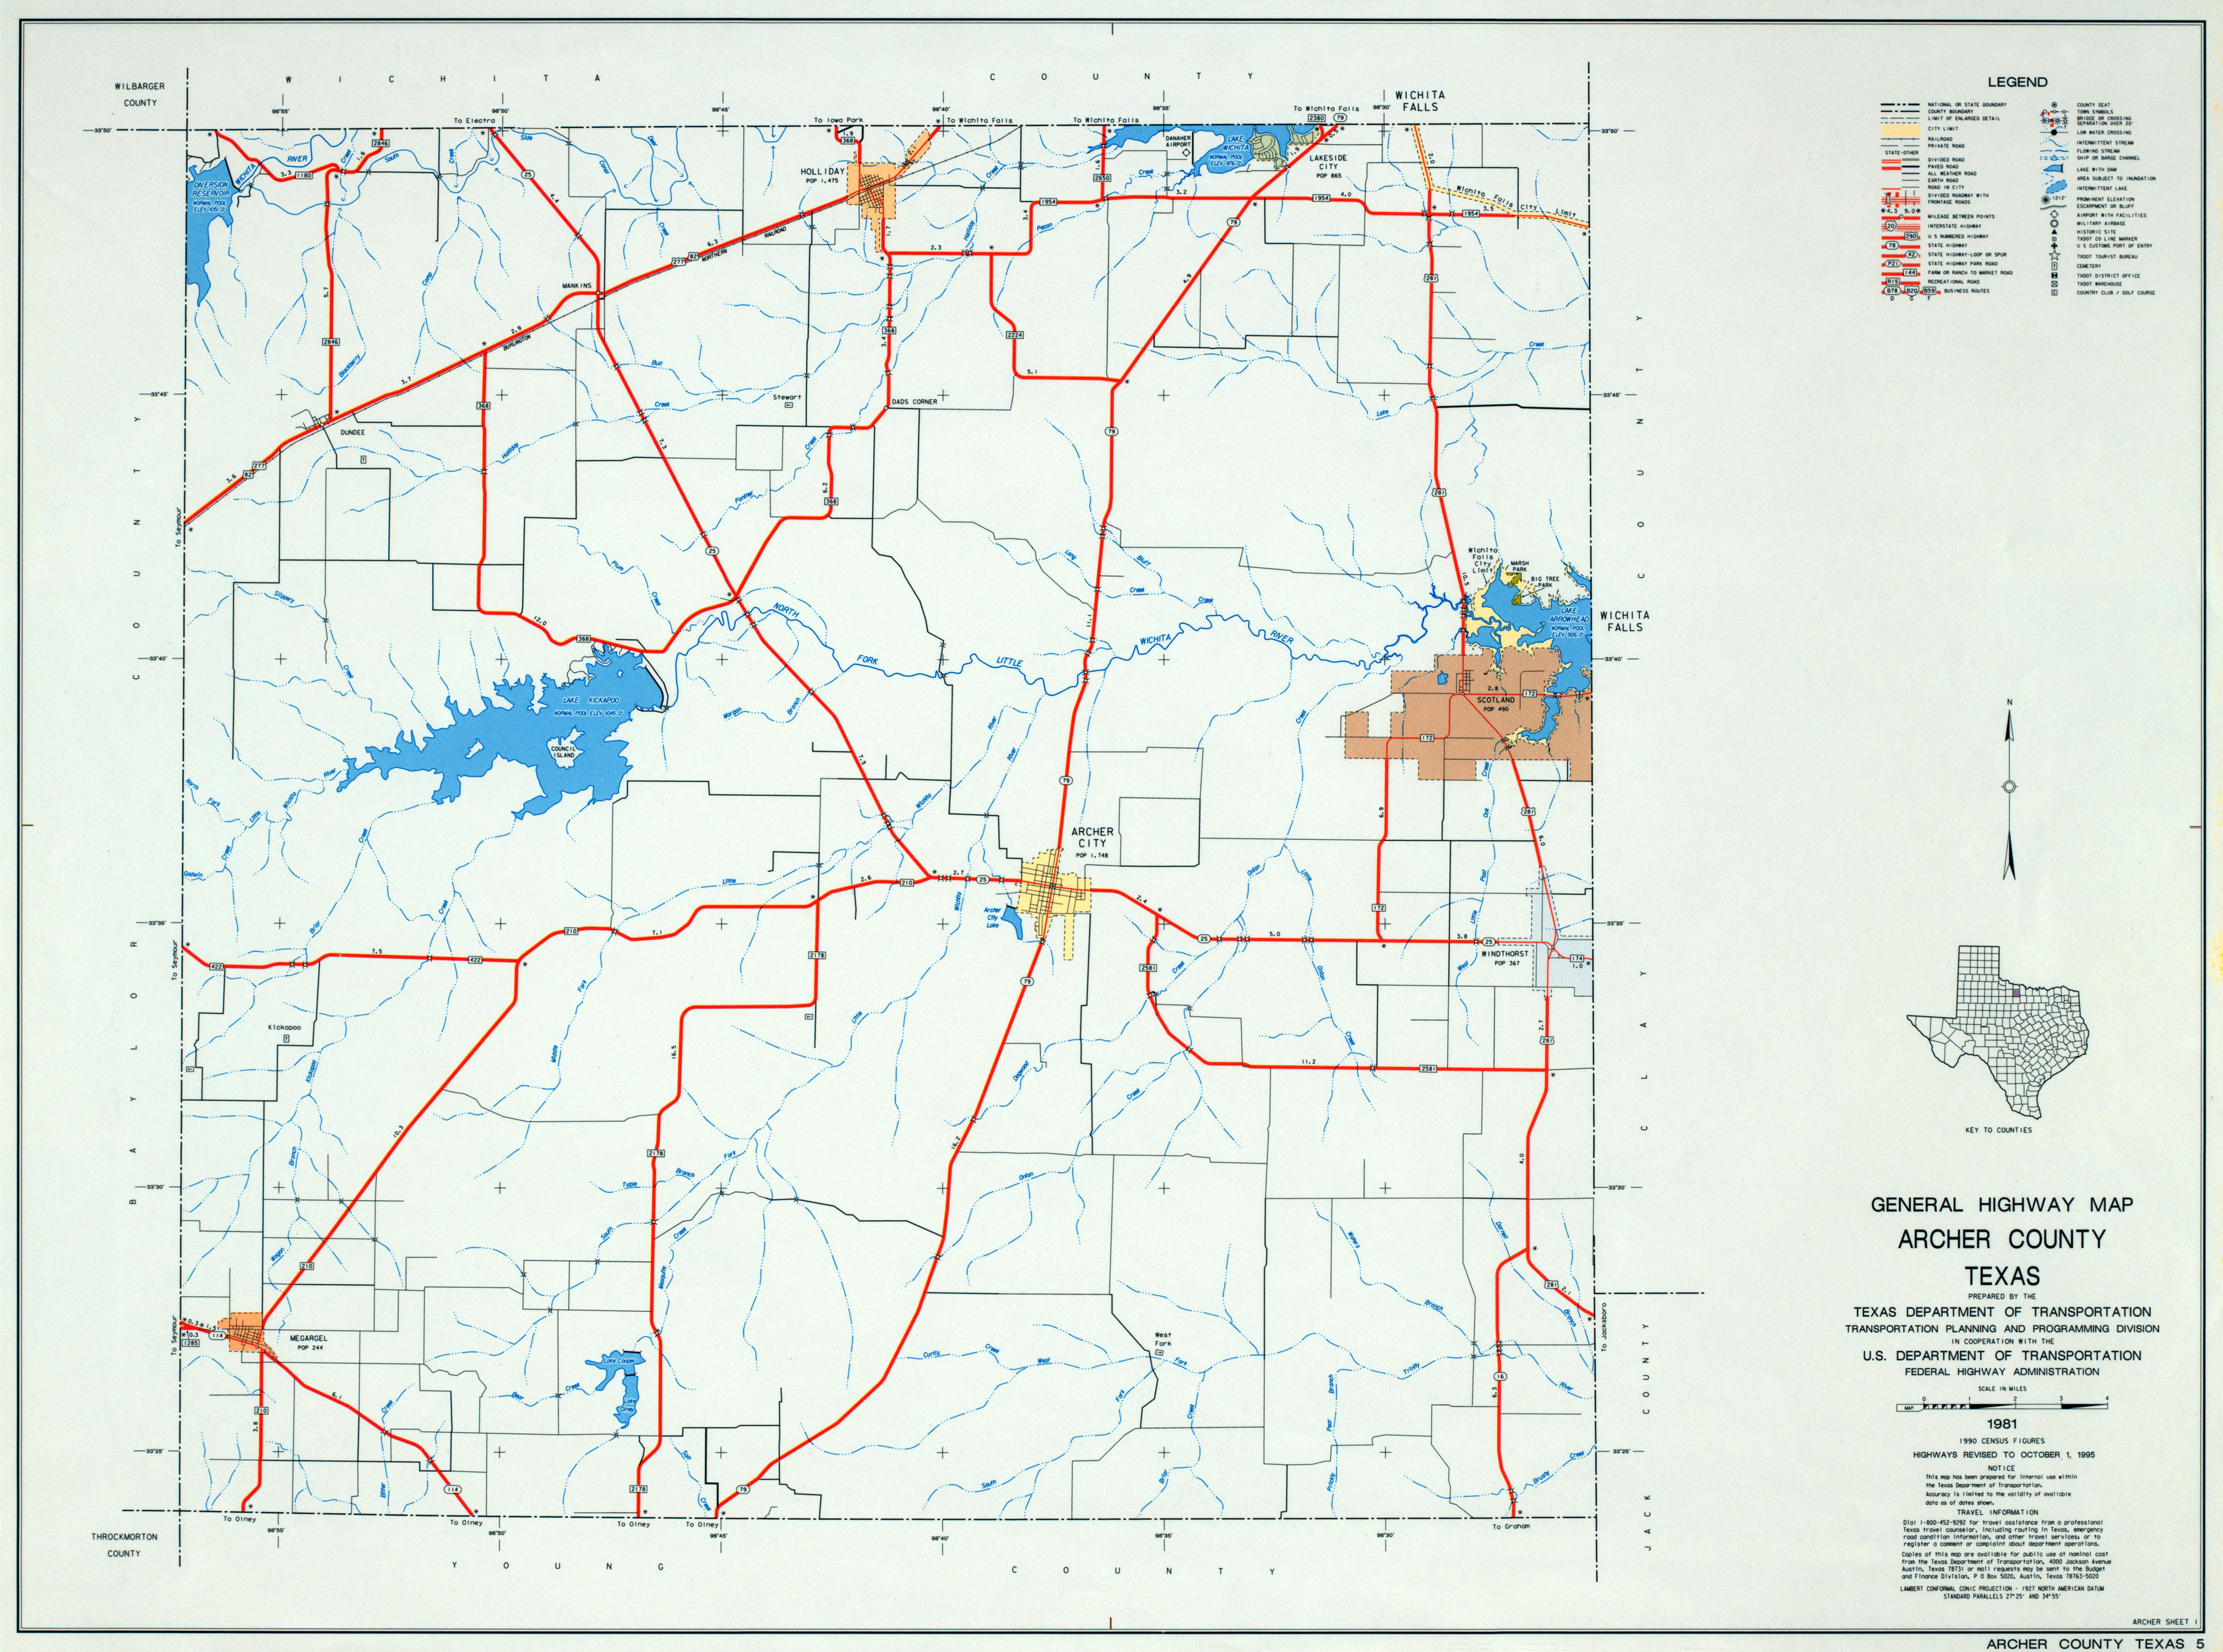 Texas County Highway Maps Browse - Perry-Castañeda Map Collection - Reeves County Texas Map